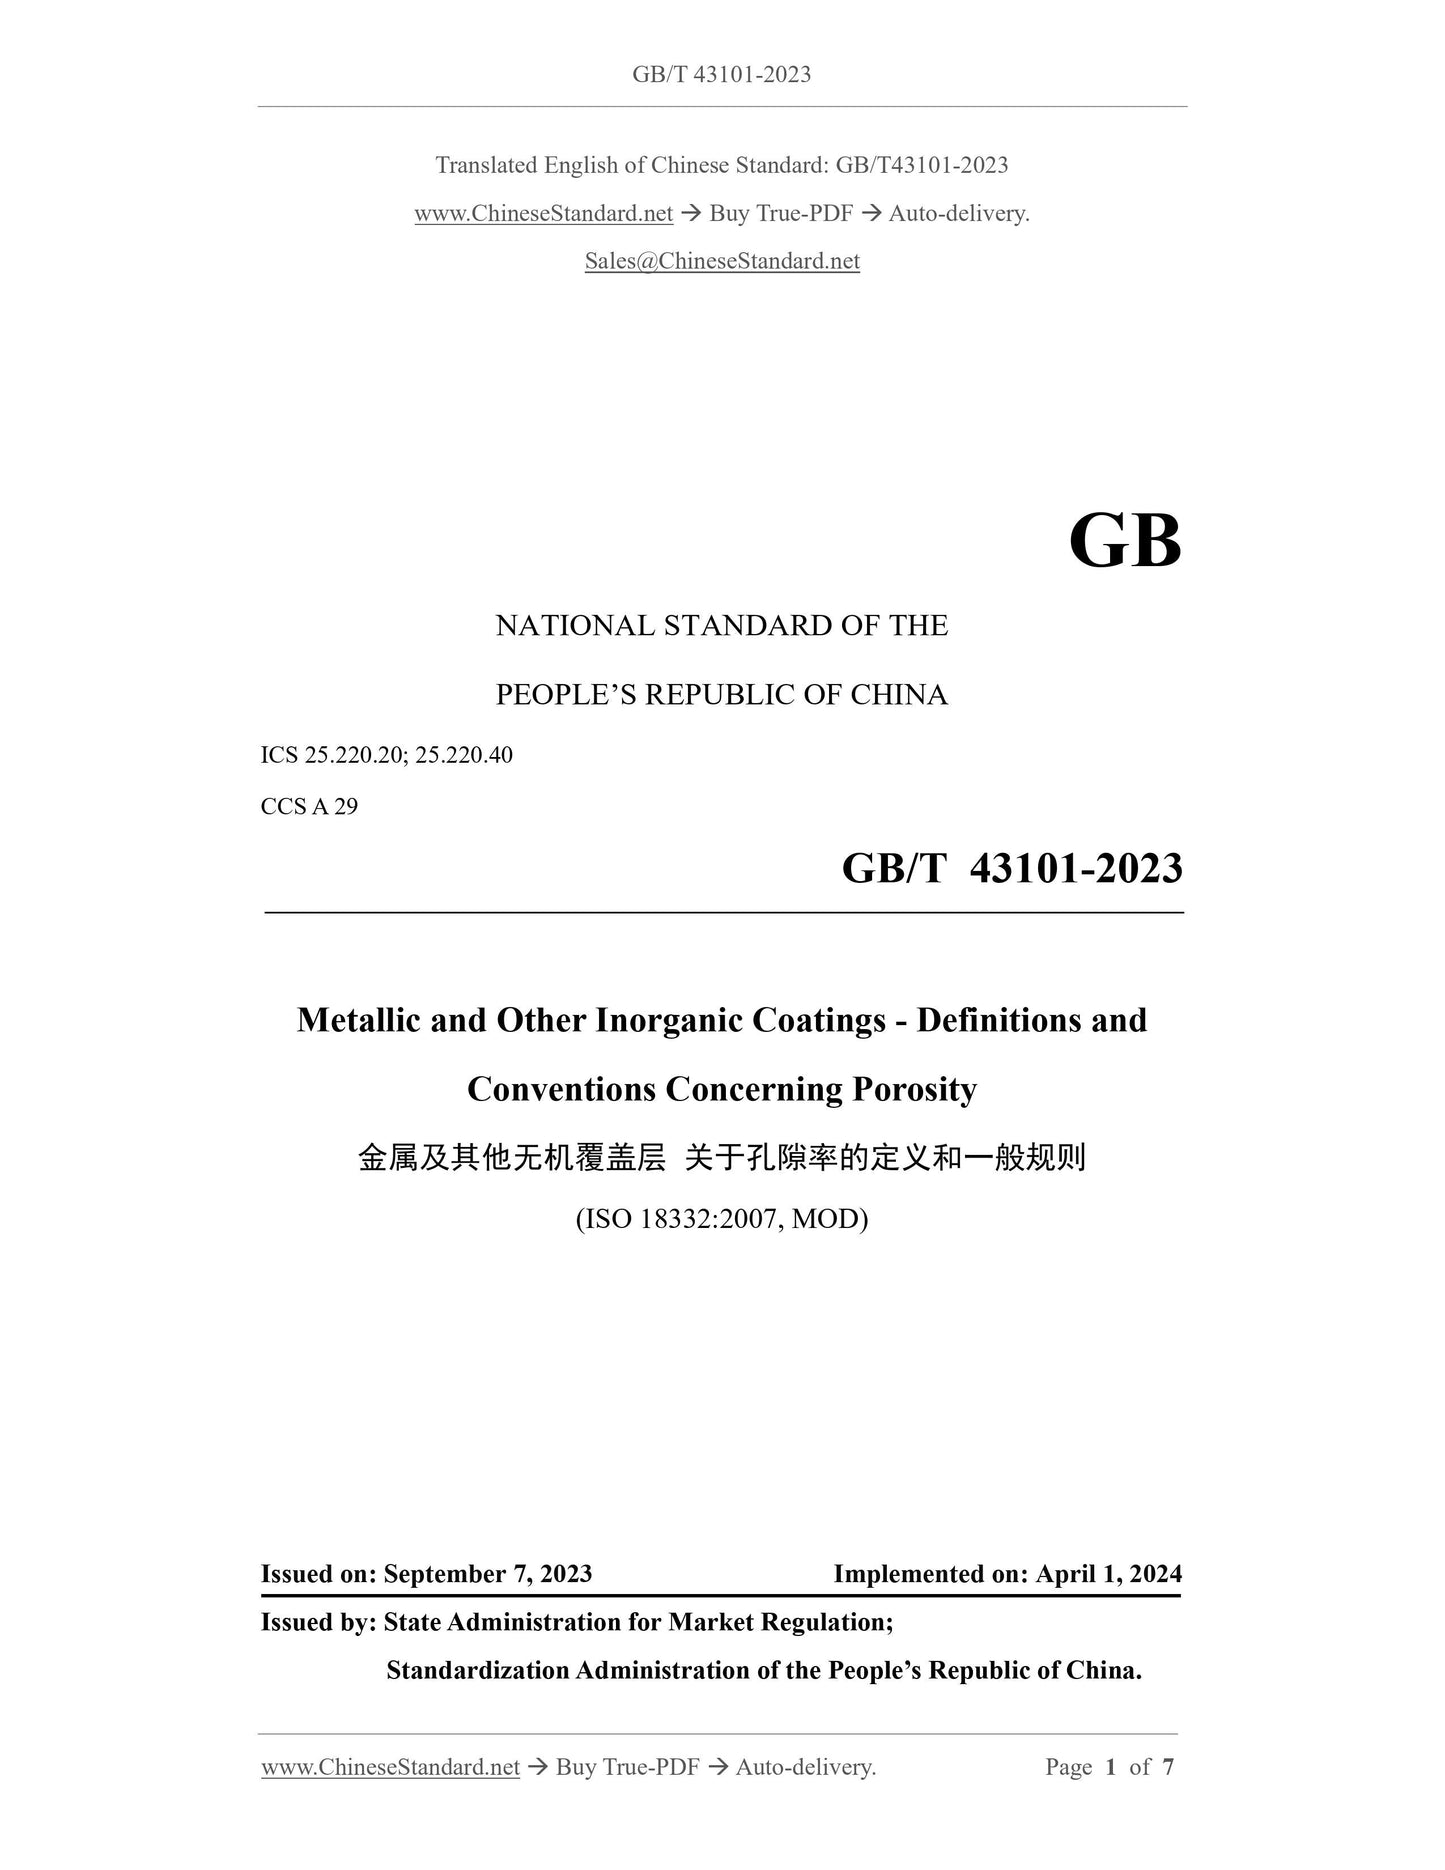 GB/T 43101-2023 Page 1